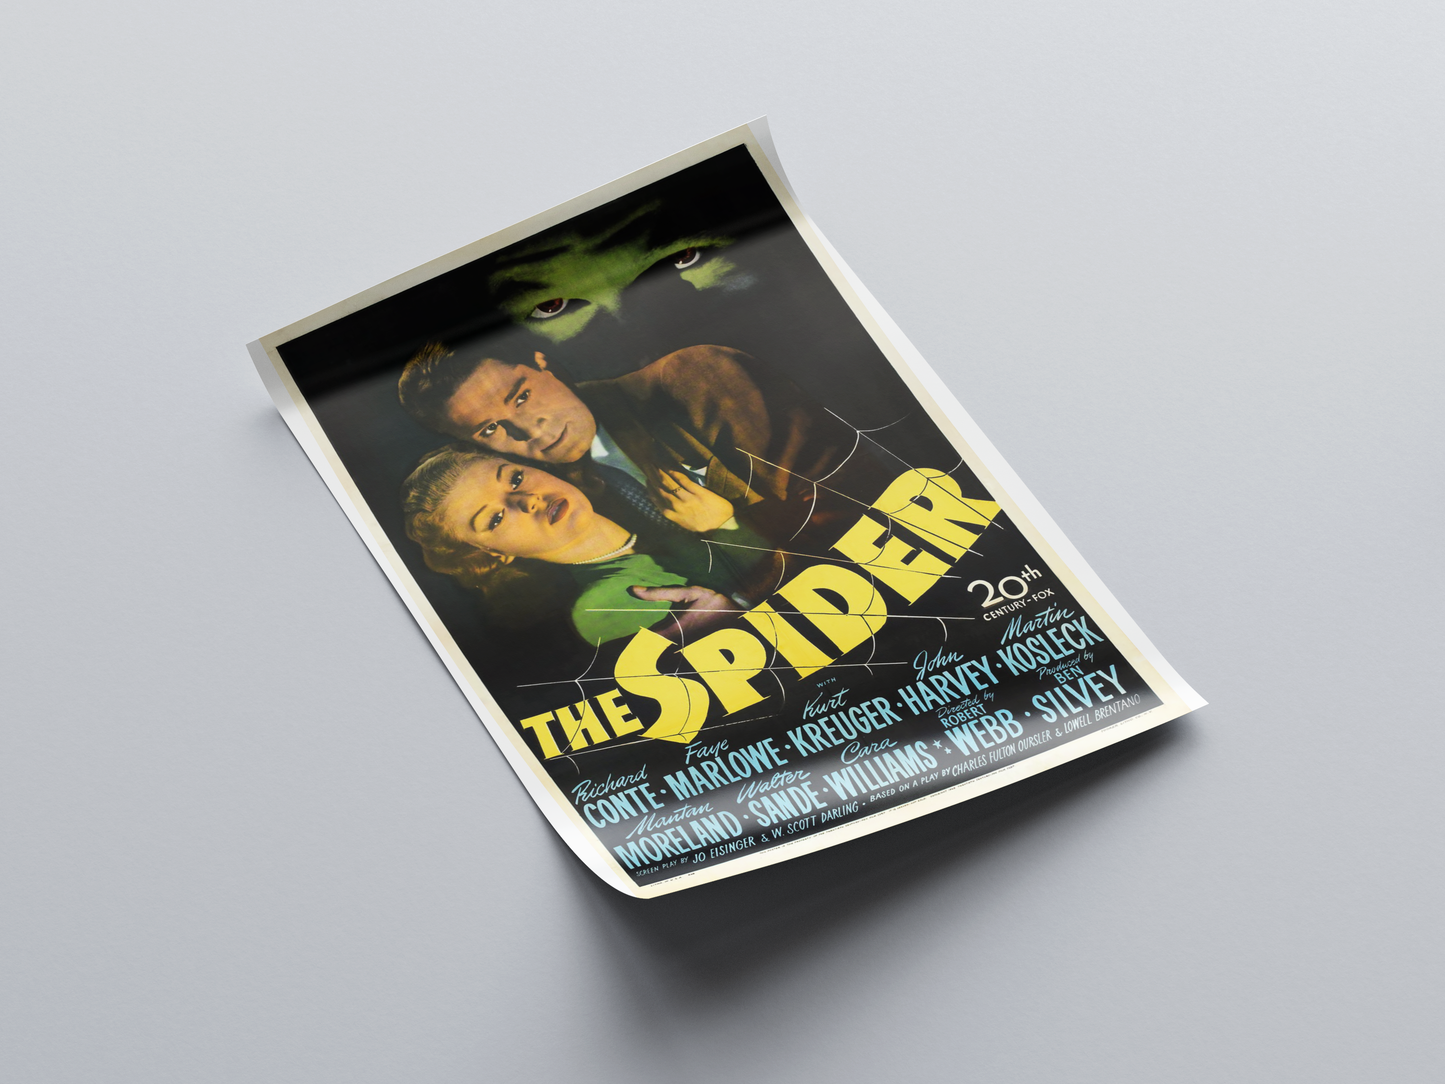 The Spider (1945)